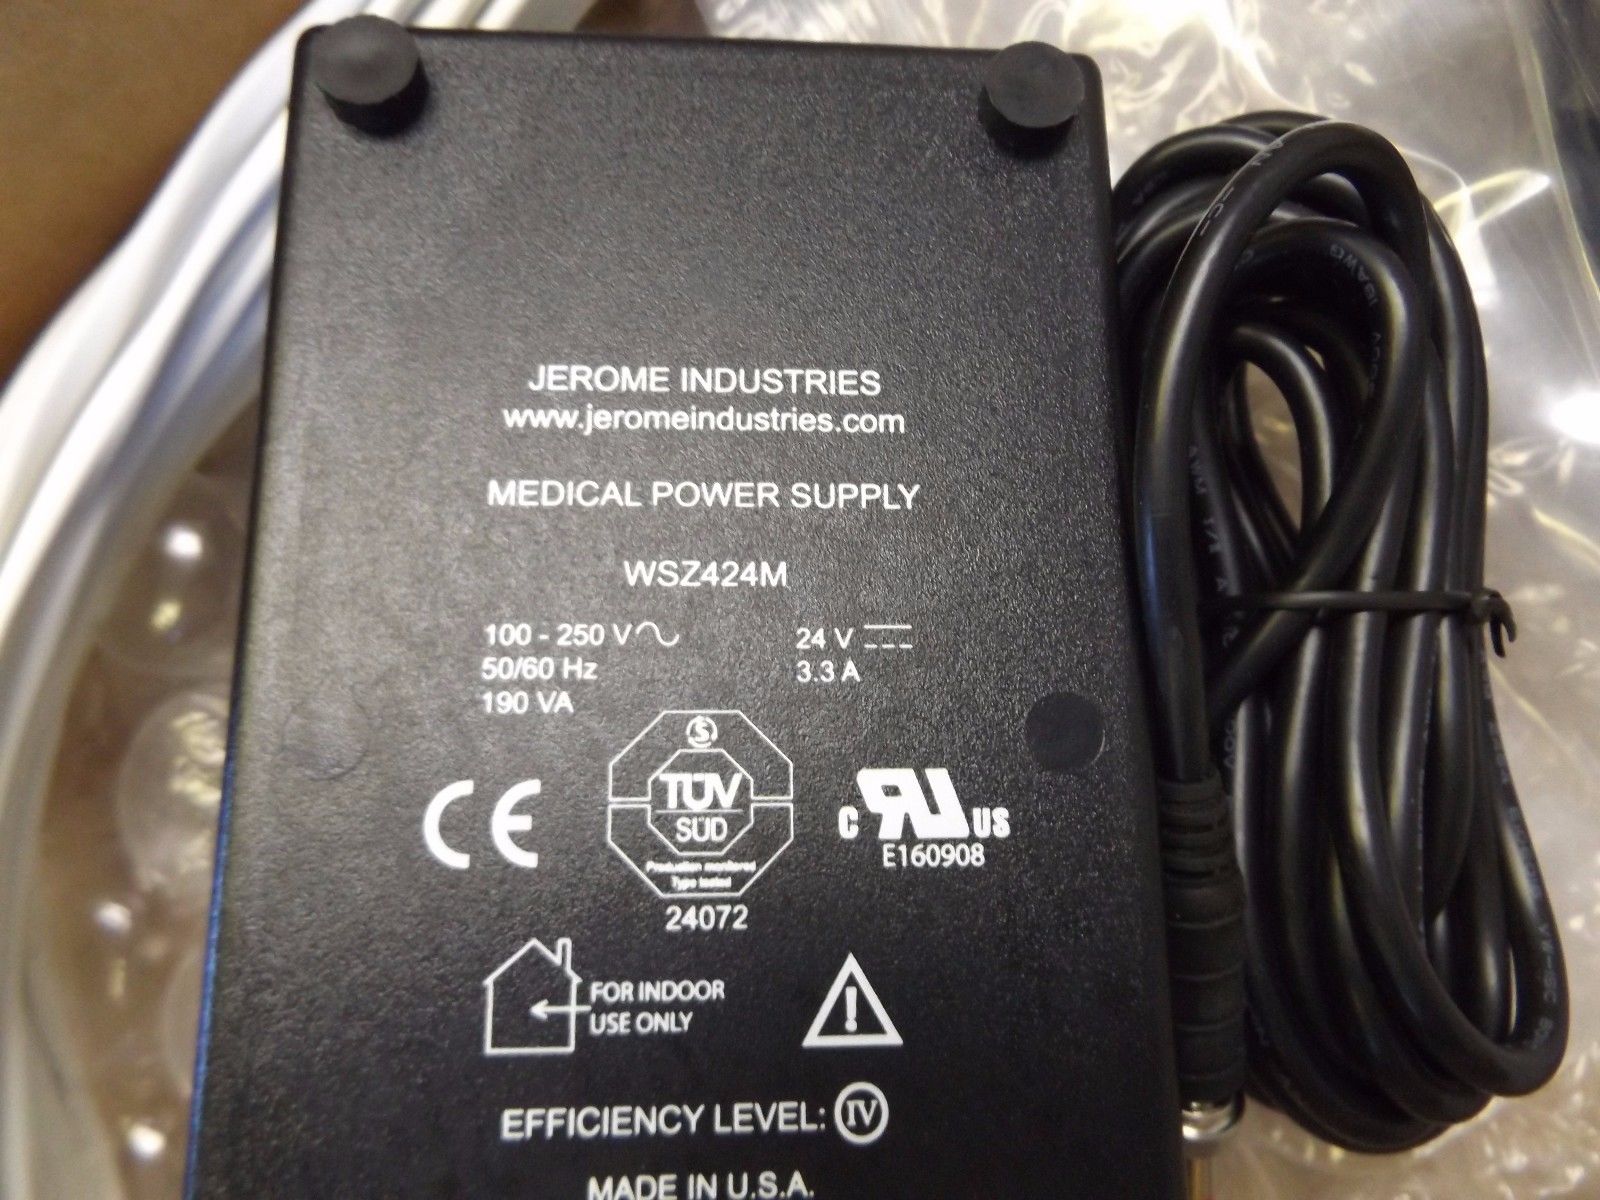 New JEROME INDUSTRIES WSZ424M 24V 3.3A Medical POWER SUPPLY ac adapter